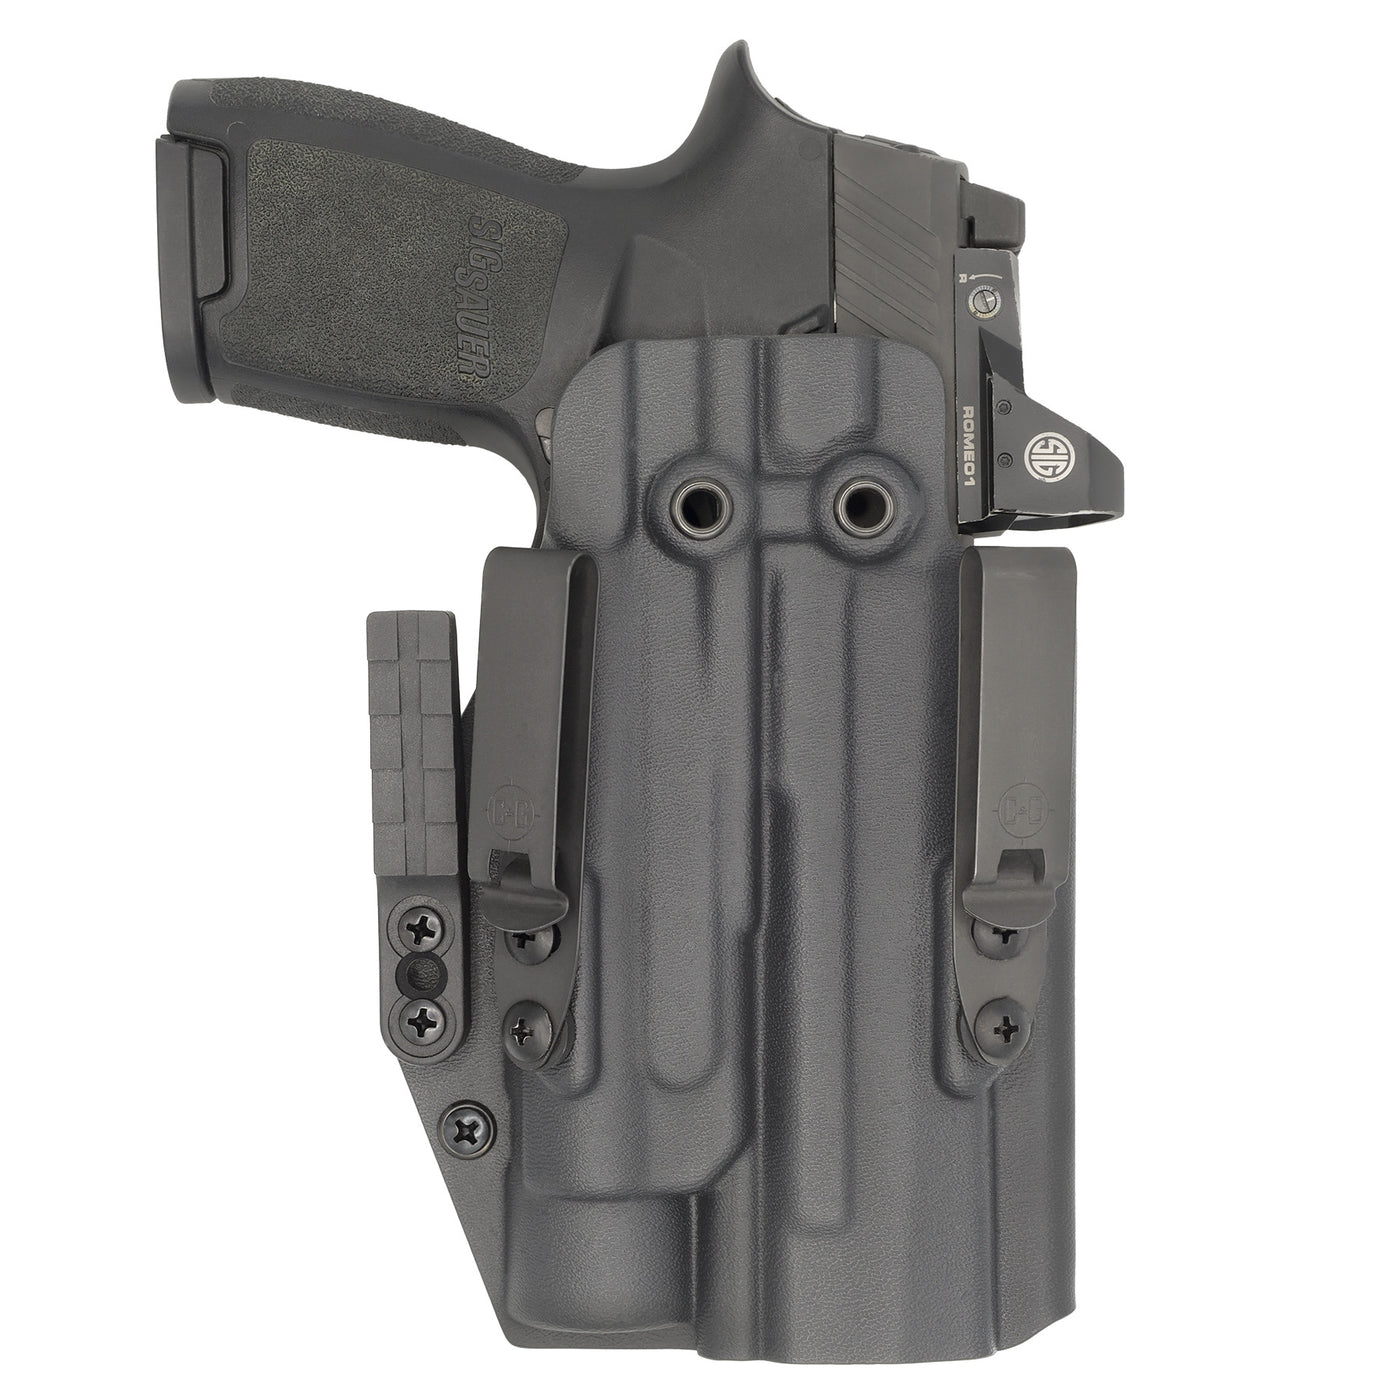 C&G Holsters quickship IWB Tactical ALPHA UPGRADE Springfield XD-M Elite Streamlight TLR1 in holstered position